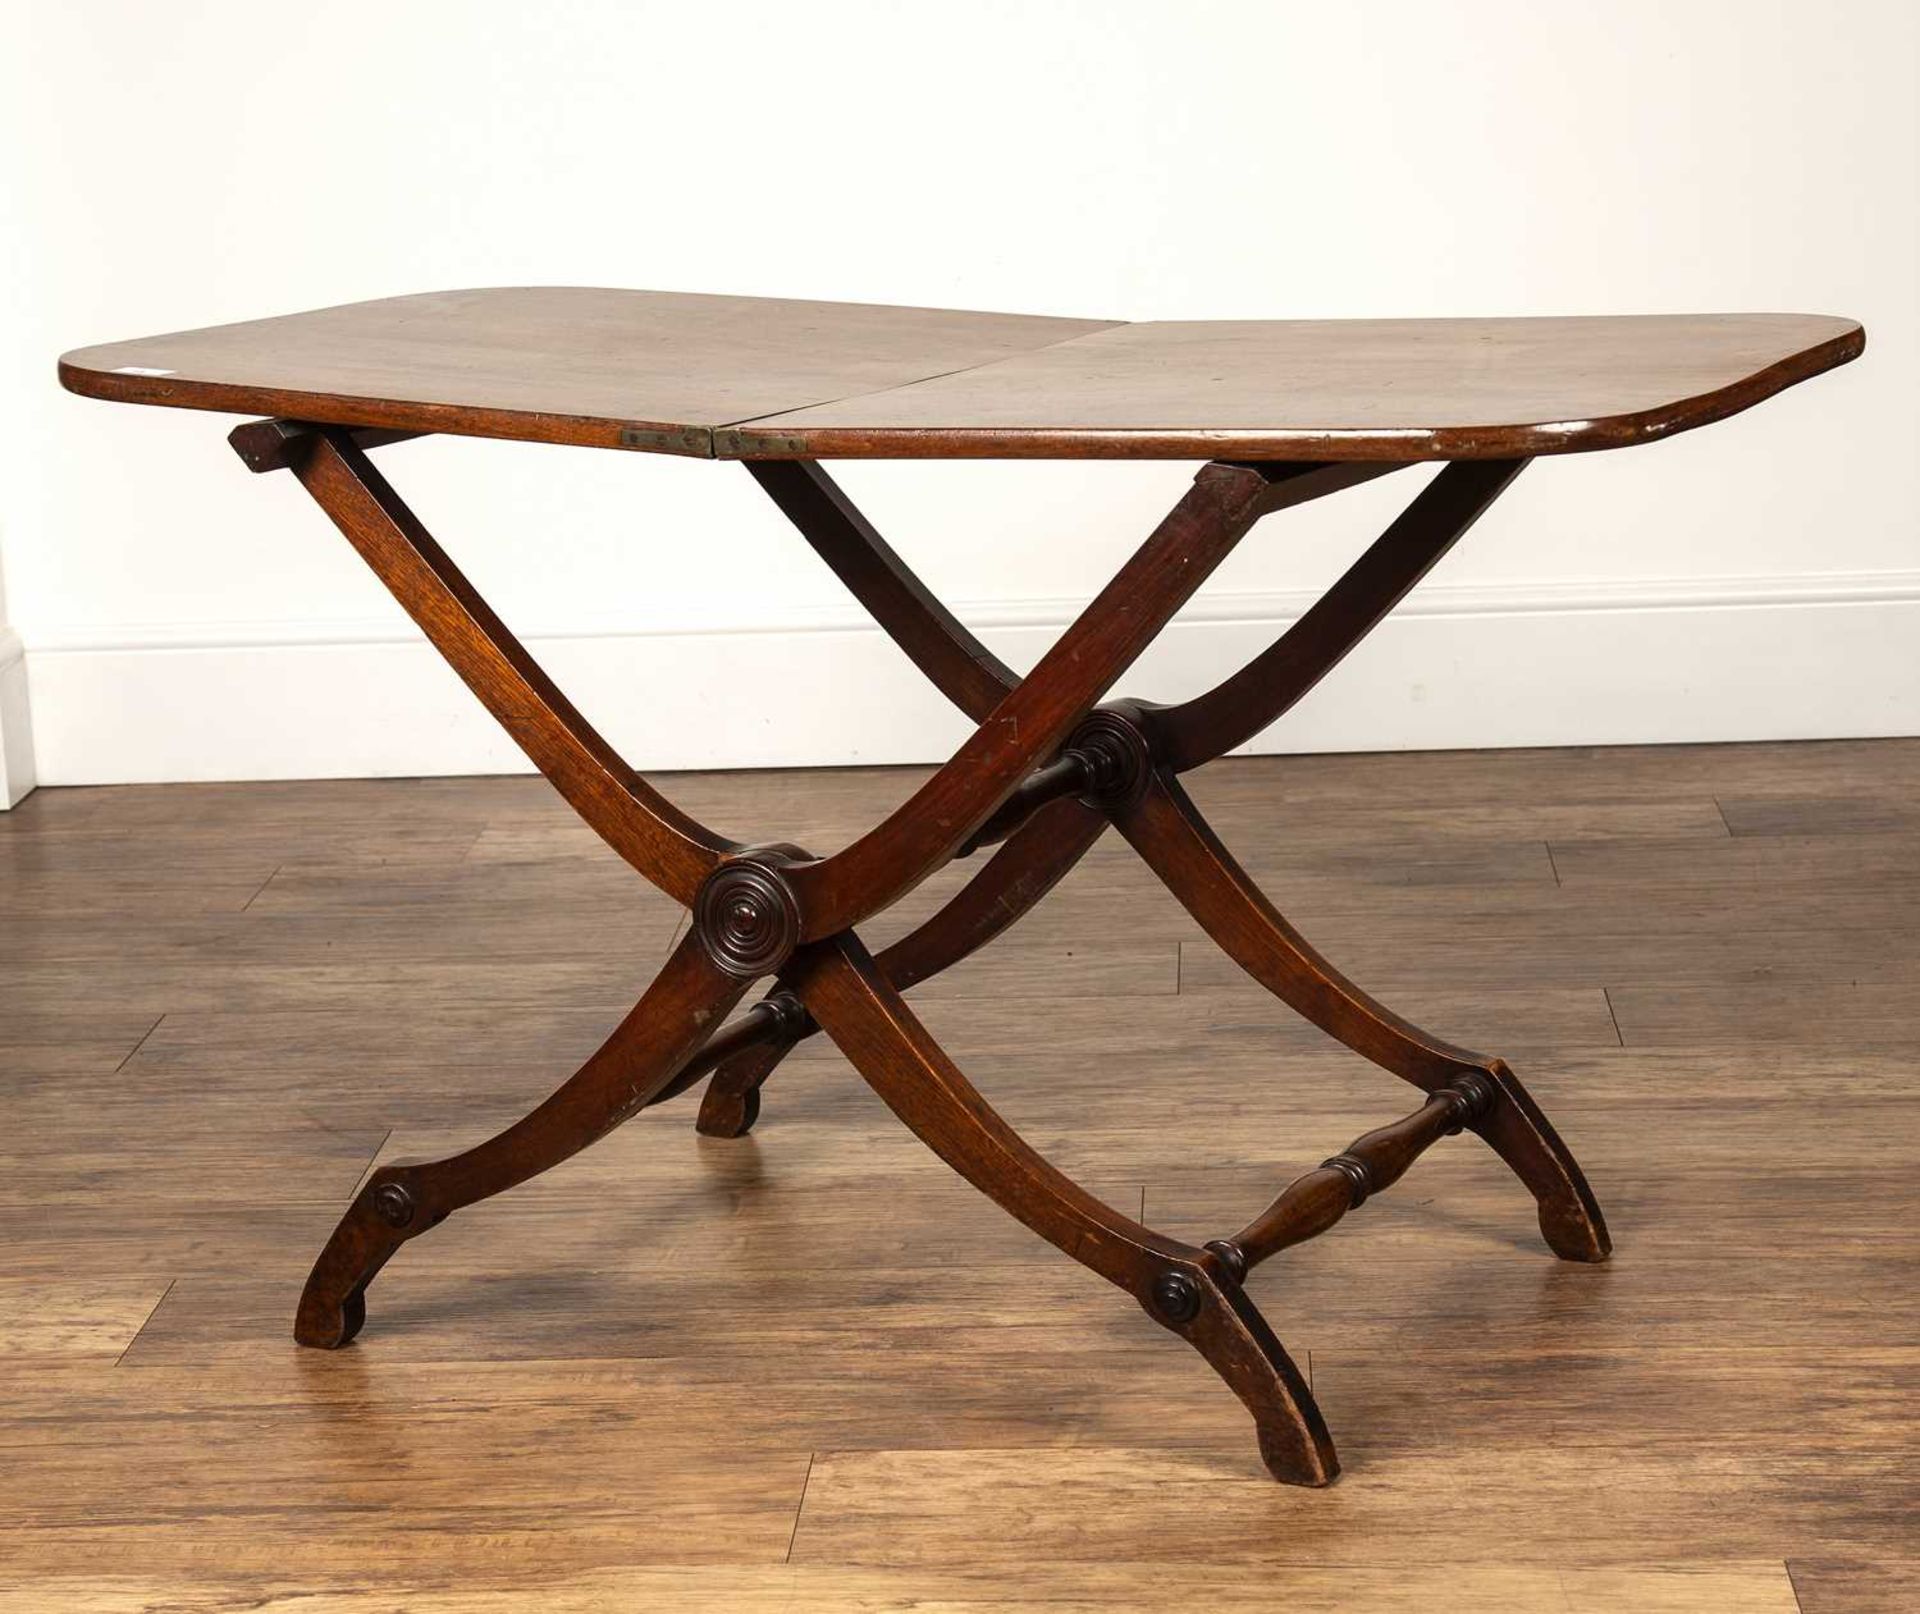 Mahogany folding coaching or campaign table 19th Century, on 'x' stretcher, 111cm wide x 64.5cm high - Image 3 of 5